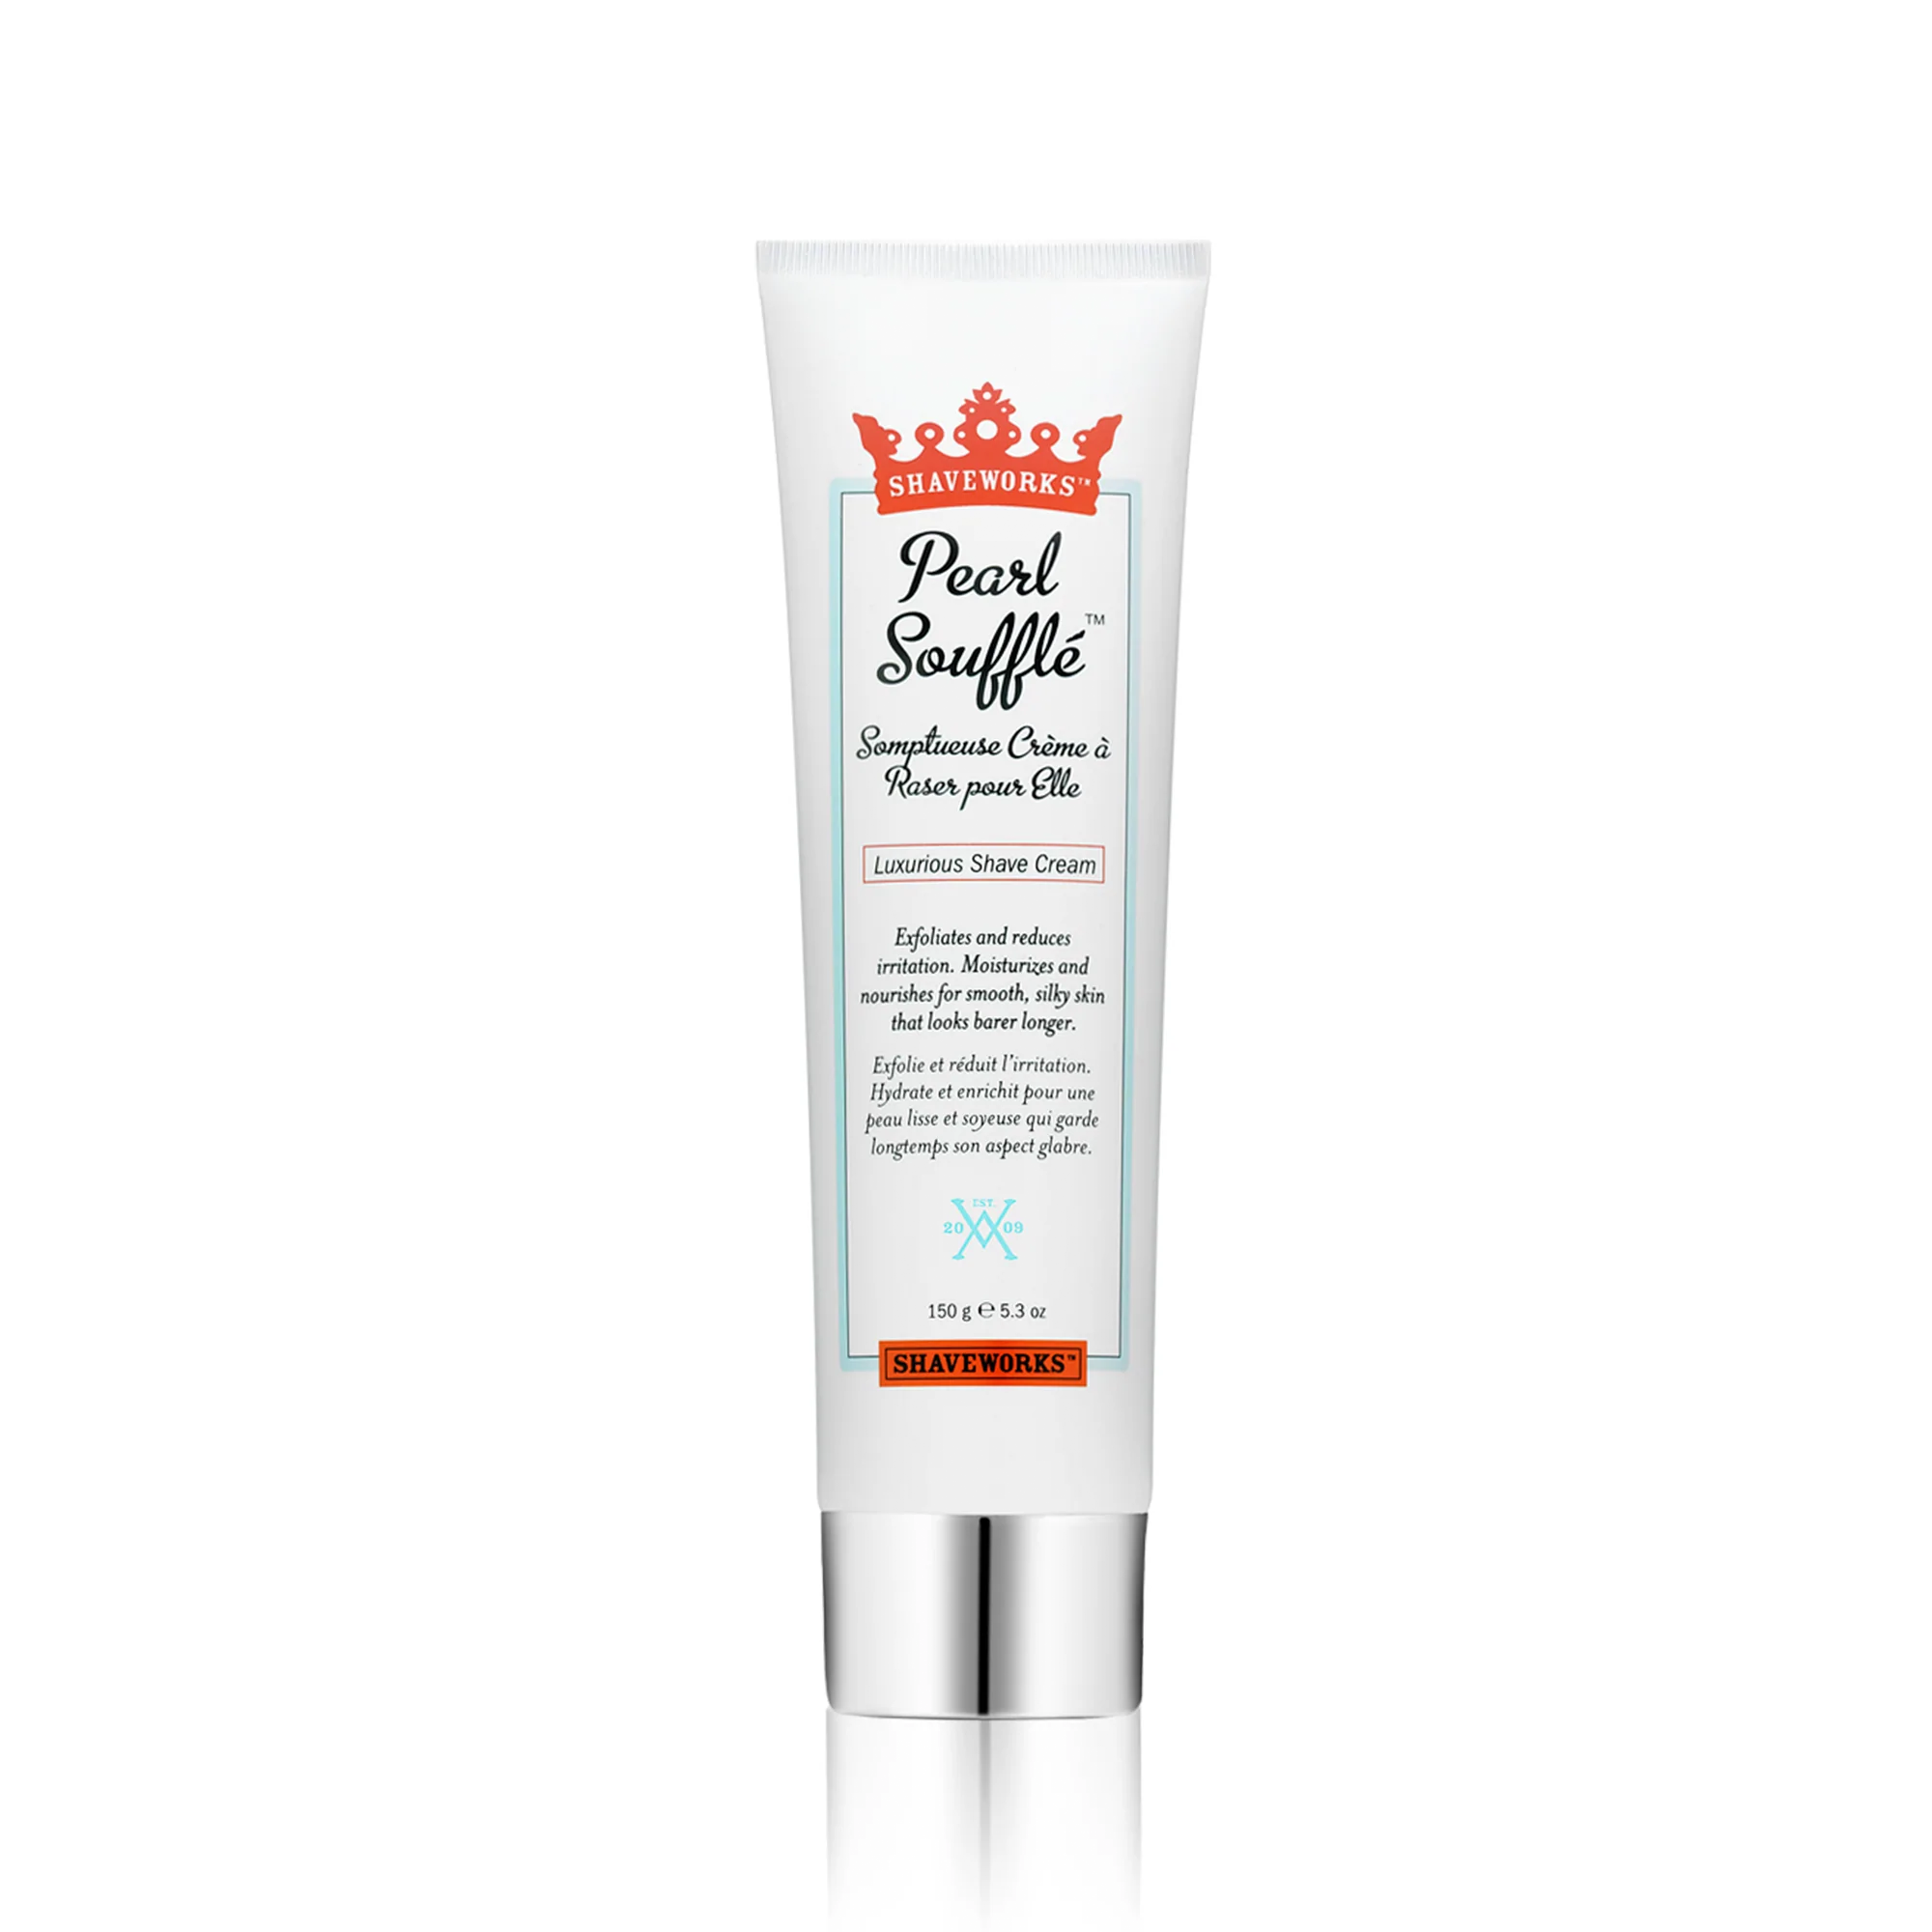 shaveworks-pearl-souffle-shaving-cream-women-1.png__PID:020a257a-ad47-4a00-b336-038dceb97498